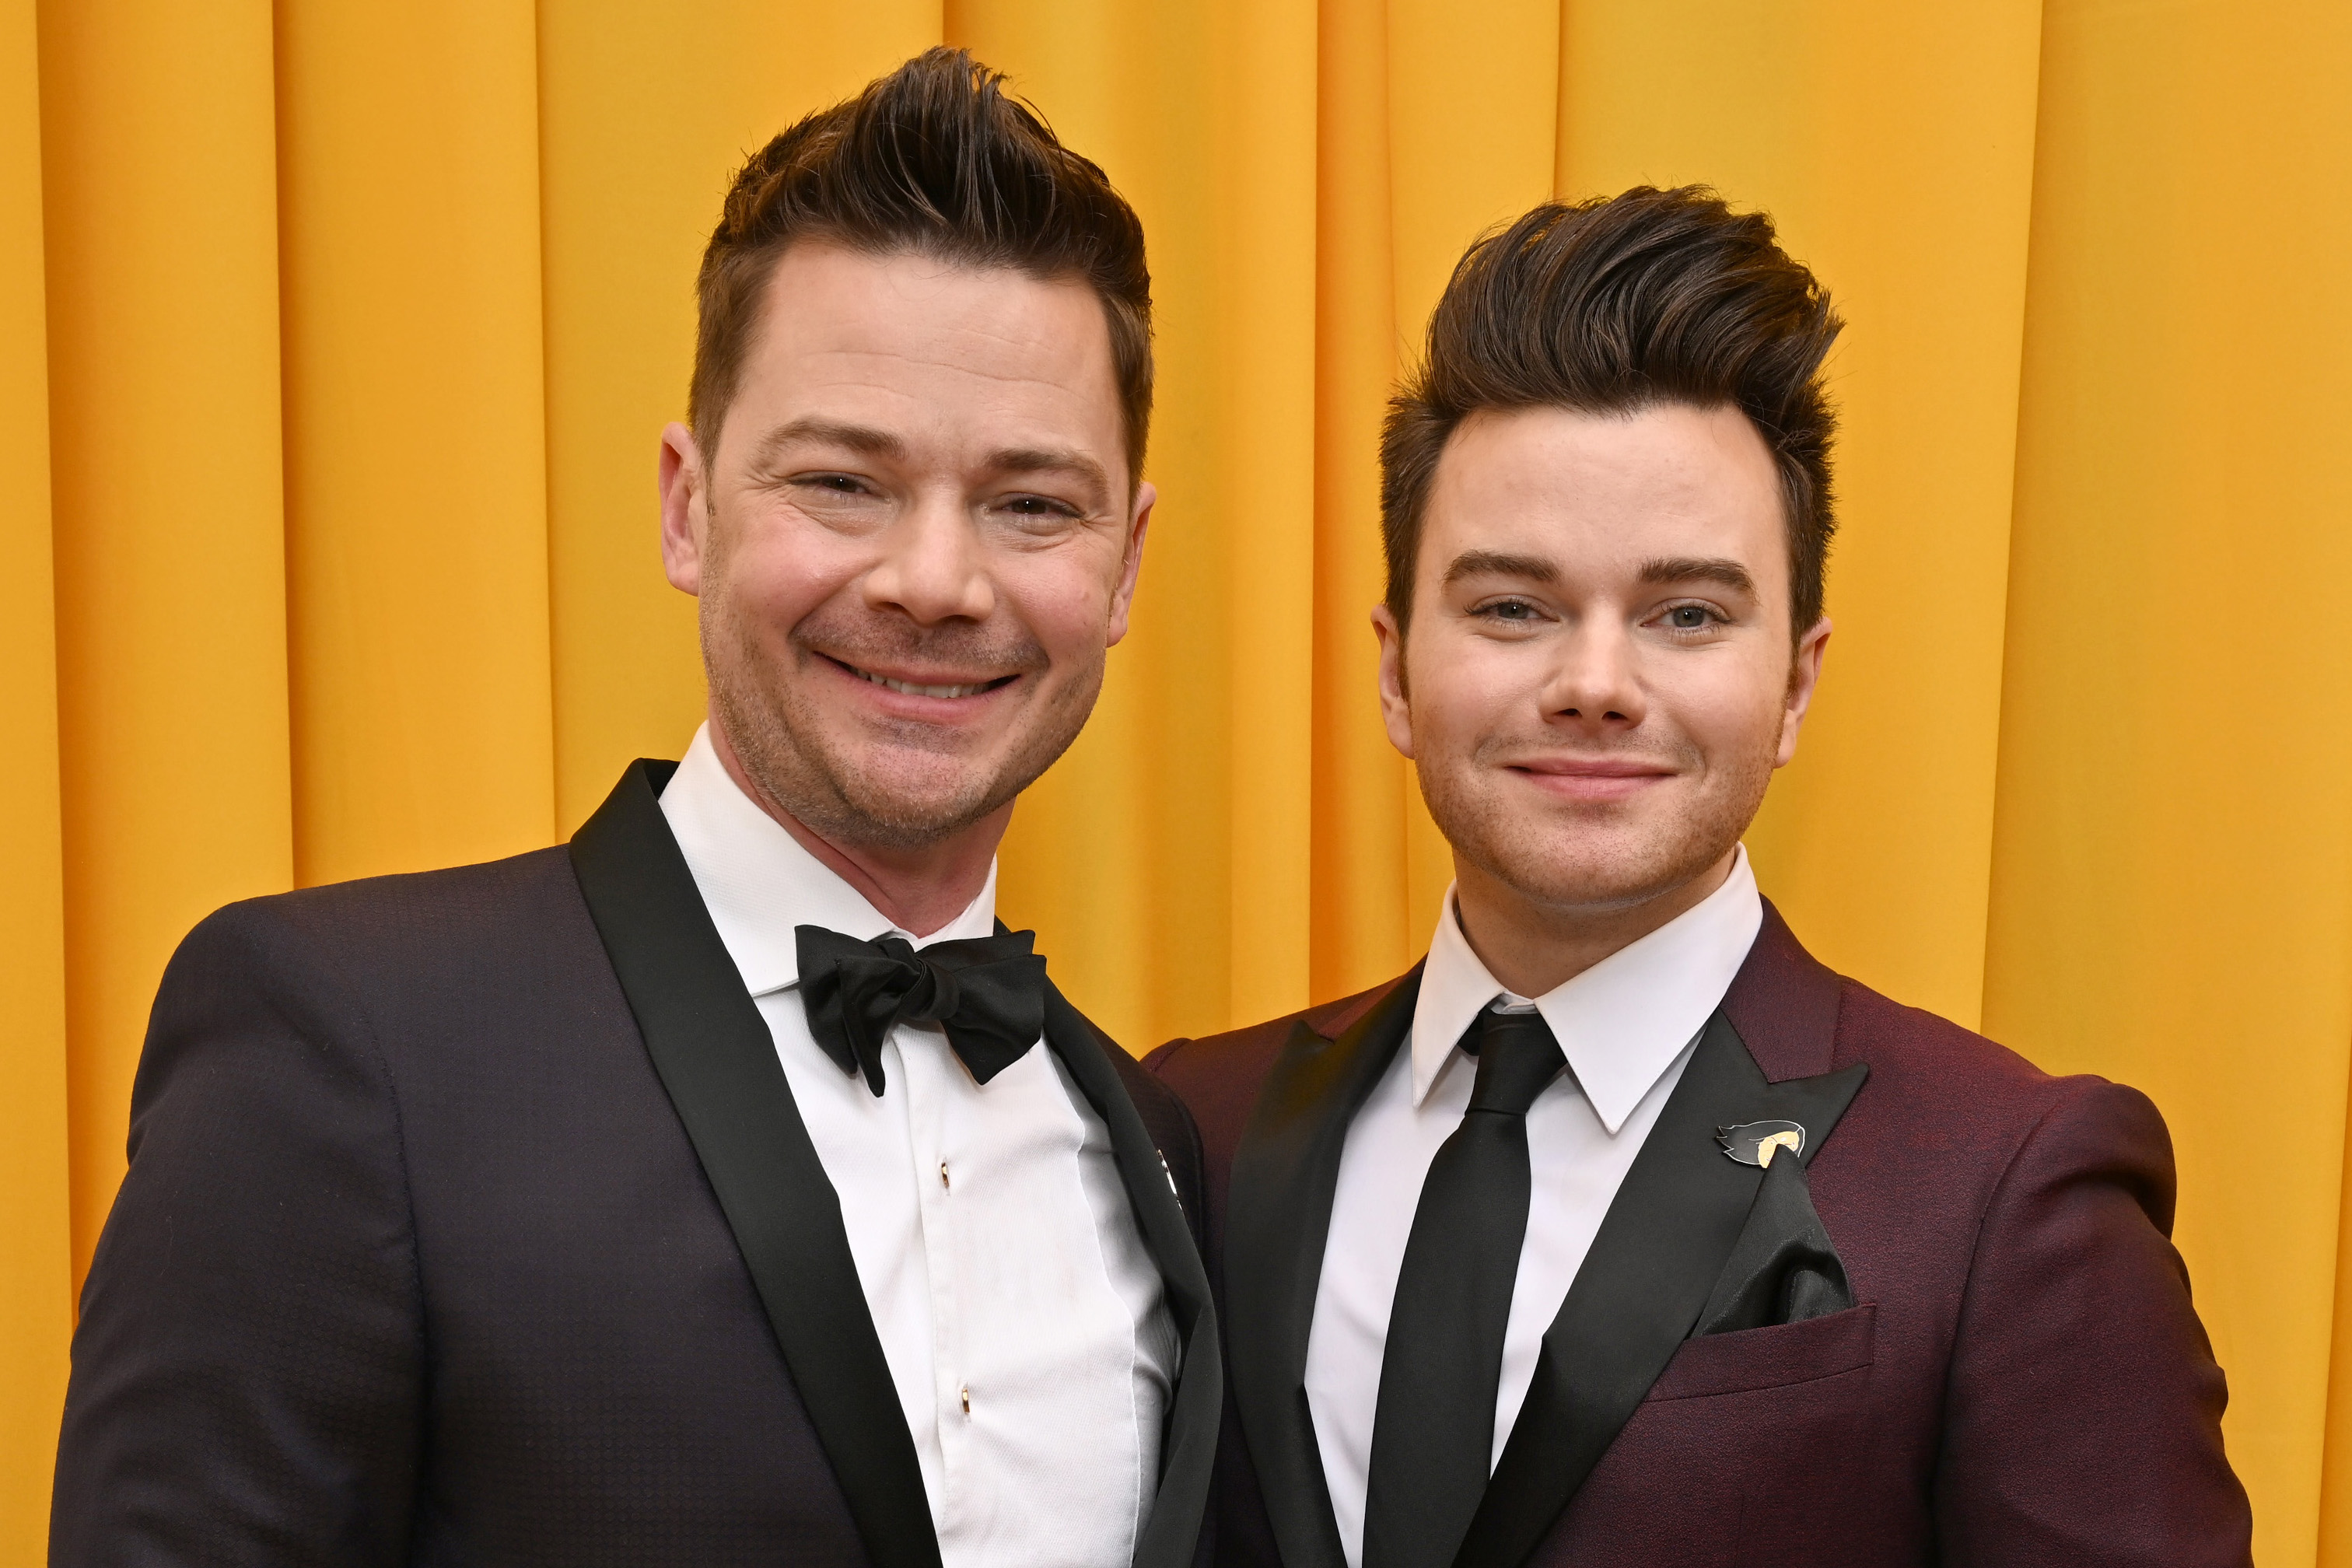 Does Chris Colfer Have a Husband? The Actor Has Been Dating Will